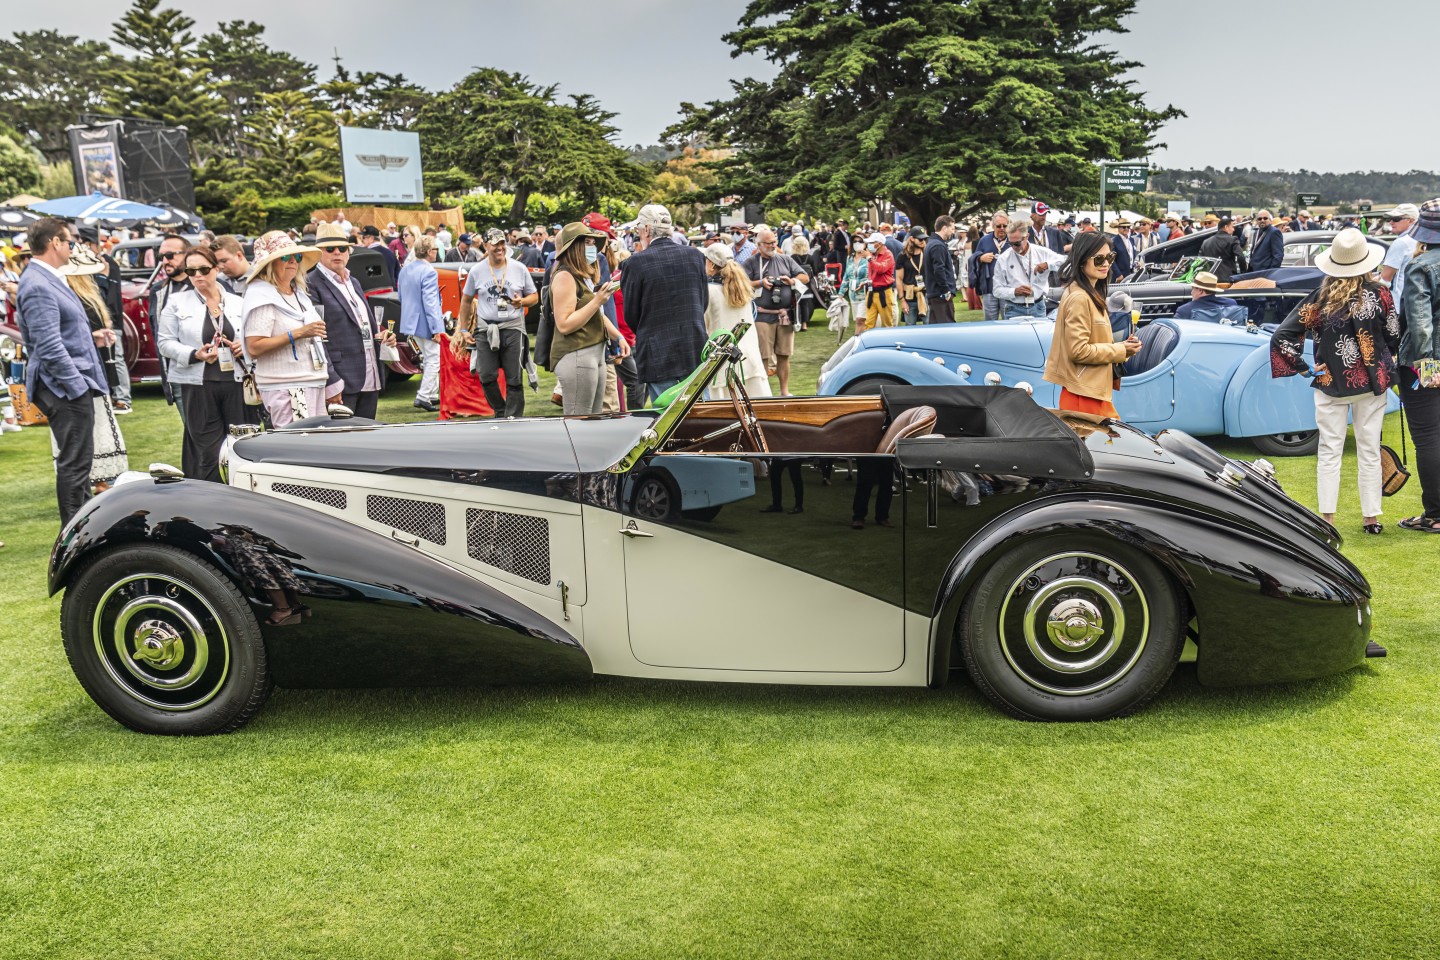 One of the four Best Of Show Nominees from the 2021 Pebble Beach Concours d'Elegance, this 1937 Bugatti Type 57S Corsica Drophead Coupé is owned by Joanie & Scott Kriens of Saratoga, California. The Bugatti was also the winner of the European Classic Sports Class